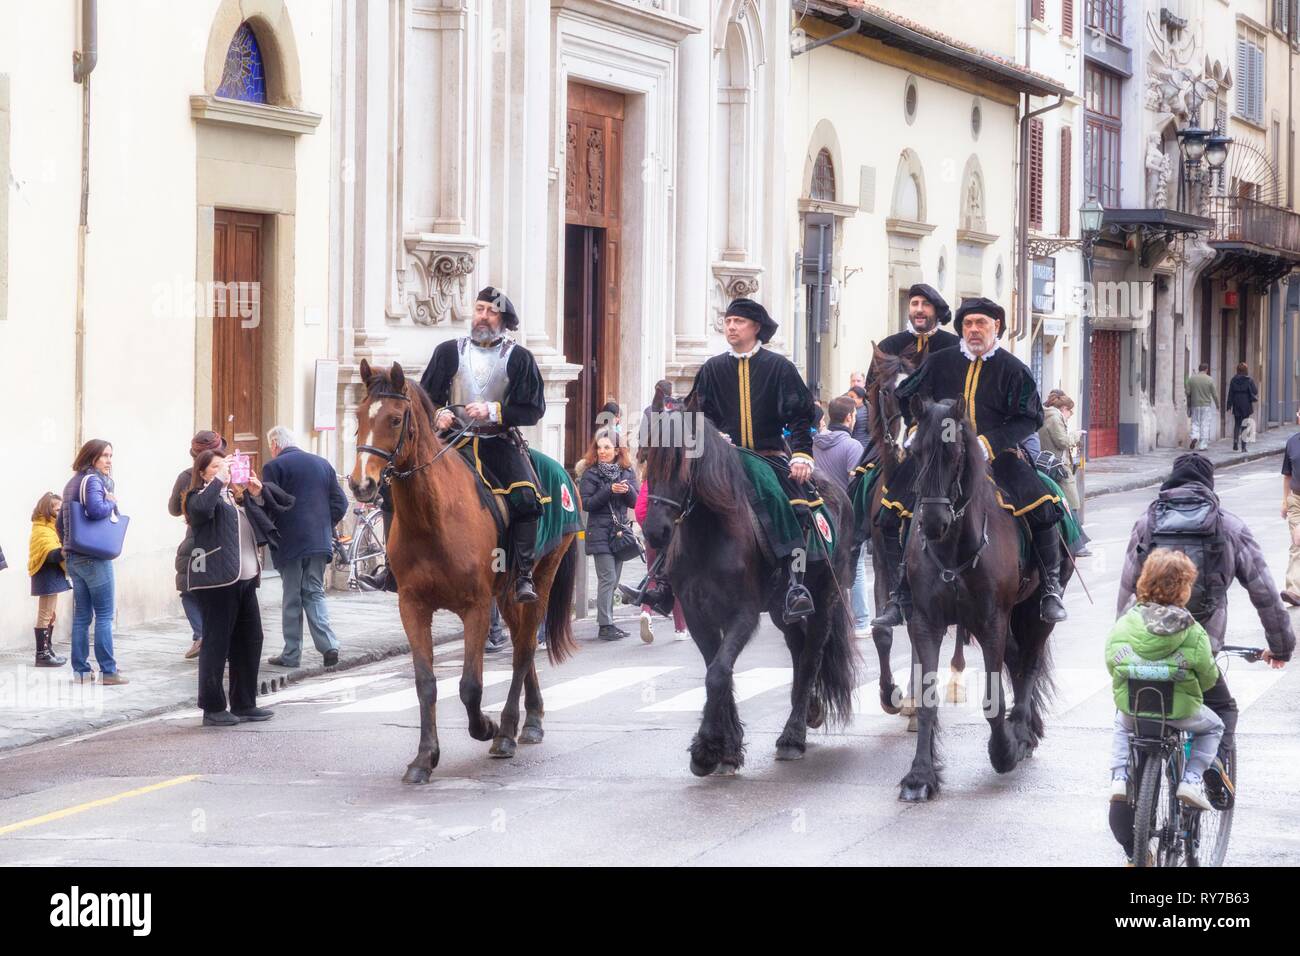 Participants in historical clothing riding on horses, Scoppio del Carro or Explosion of the Cart festival, Florence, Tuscany Stock Photo